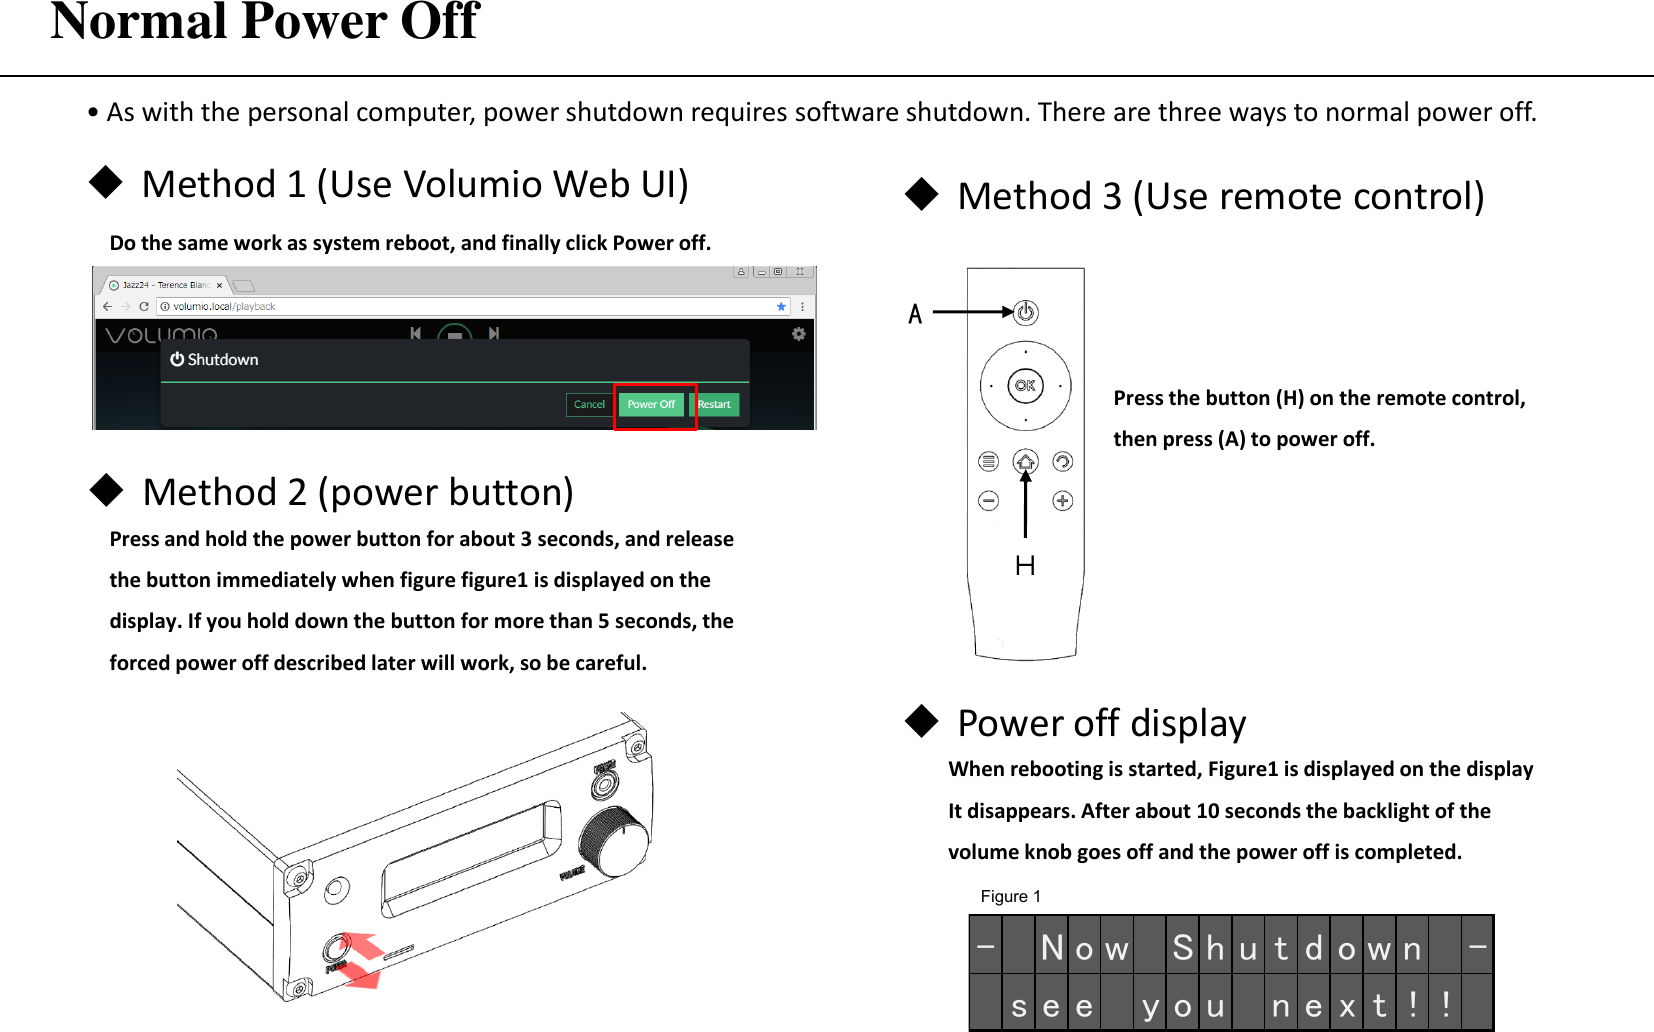 Normal Power Off  • As with the personal computer, power shutdown requires software shutdown. There are three ways to normal power off. Method 3 (Use remote control) Figure 1 Method 1 (Use Volumio Web UI)  Do the same work as system reboot, and finally click Power off. Press the button (H) on the remote control,  then press (A) to power off. Power off display When rebooting is started, Figure1 is displayed on the display It disappears. After about 10 seconds the backlight of the volume knob goes off and the power off is completed. A Ｈ - N o w S h u t d o w n -s e e   y o u n e x t ! !Method 2 (power button) Press and hold the power button for about 3 seconds, and release the button immediately when figure figure1 is displayed on the display. If you hold down the button for more than 5 seconds, the forced power off described later will work, so be careful. 